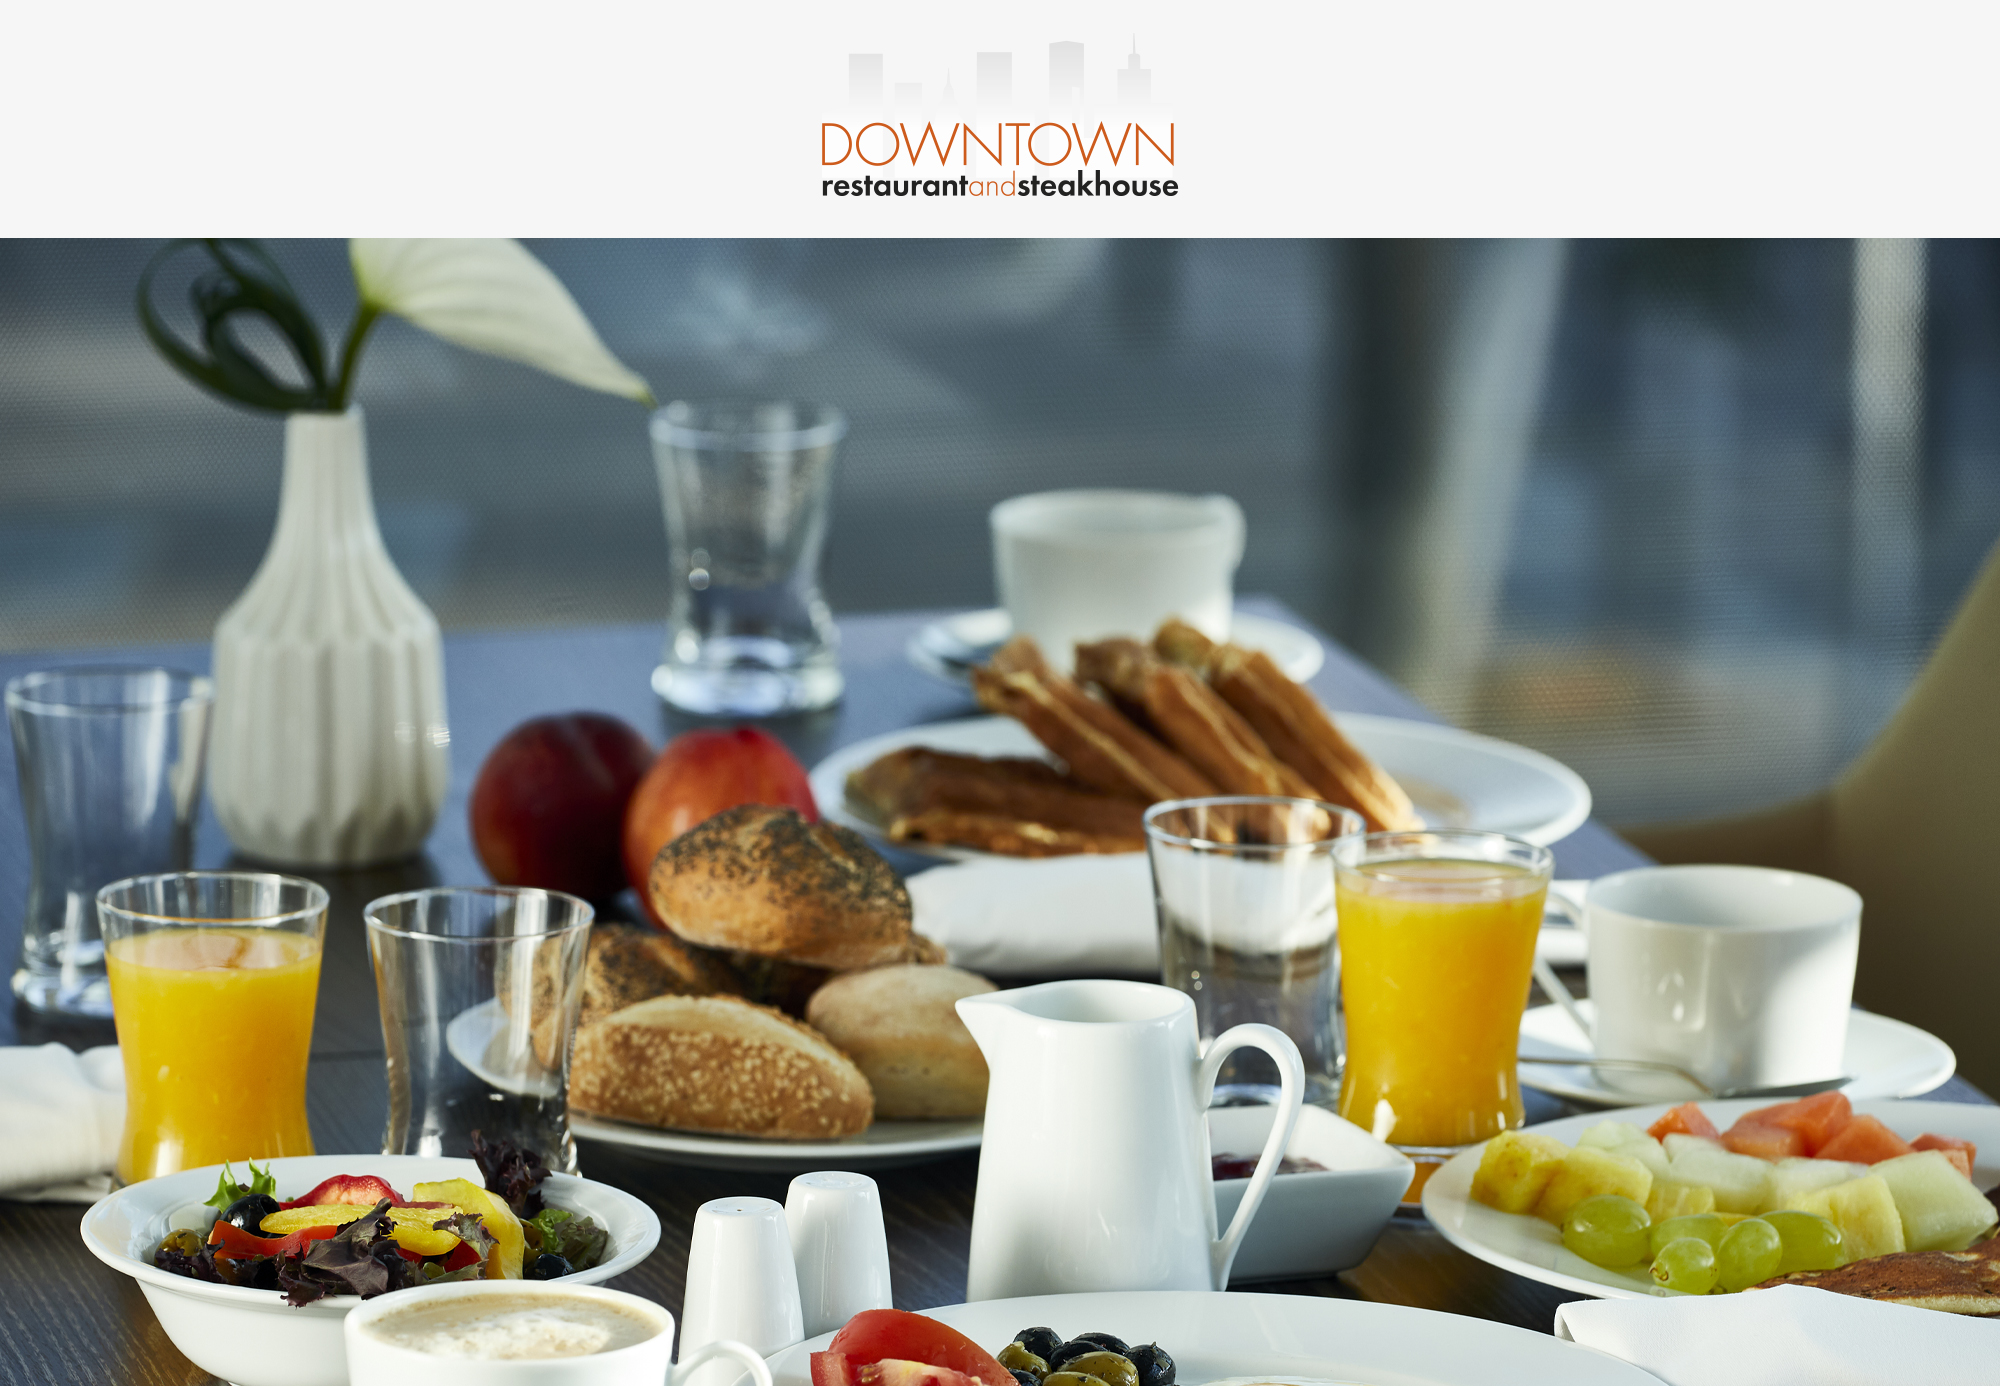 Breakfast buffet in DownTown Restaurant for one person